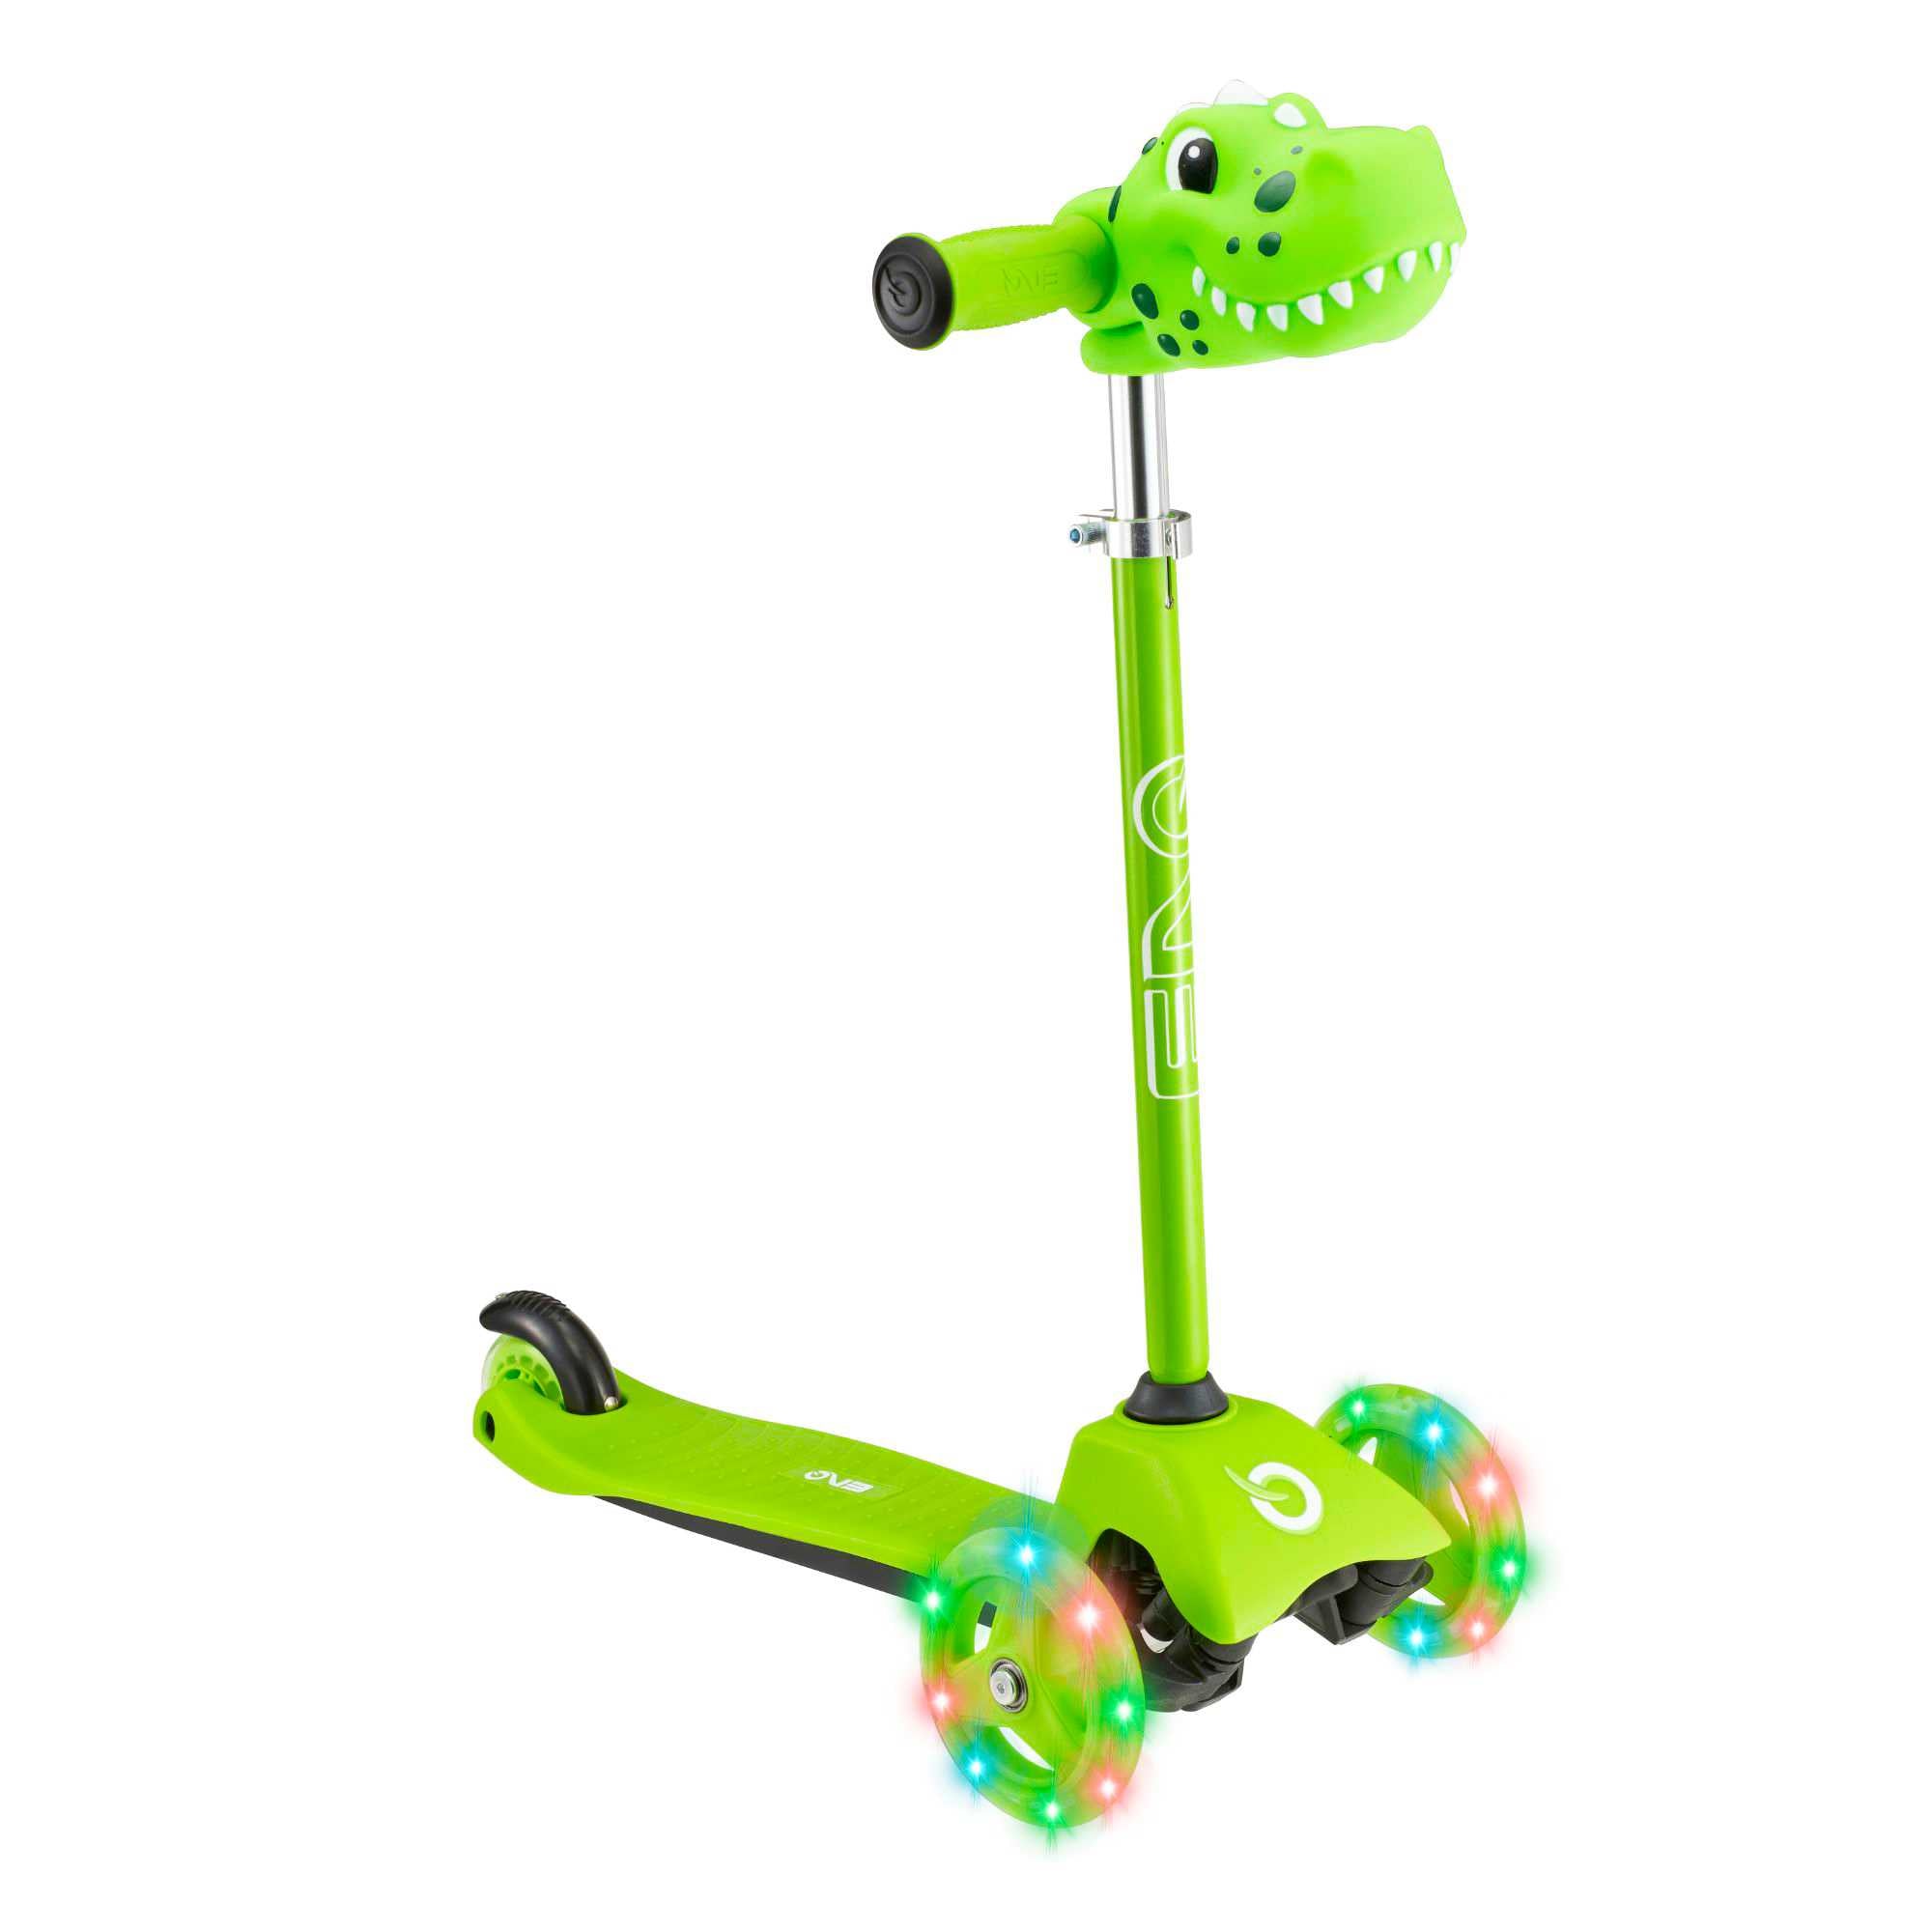 kids scooter , scooters for children aged 2-5 , scooter for kids 2 , push scooter for kids , foldable scooter , boys and girls scooter, blue scooter , kick scooter for kids aged 2+, ride ons for kids,  childrens push scooter, 3 wheeled scooter